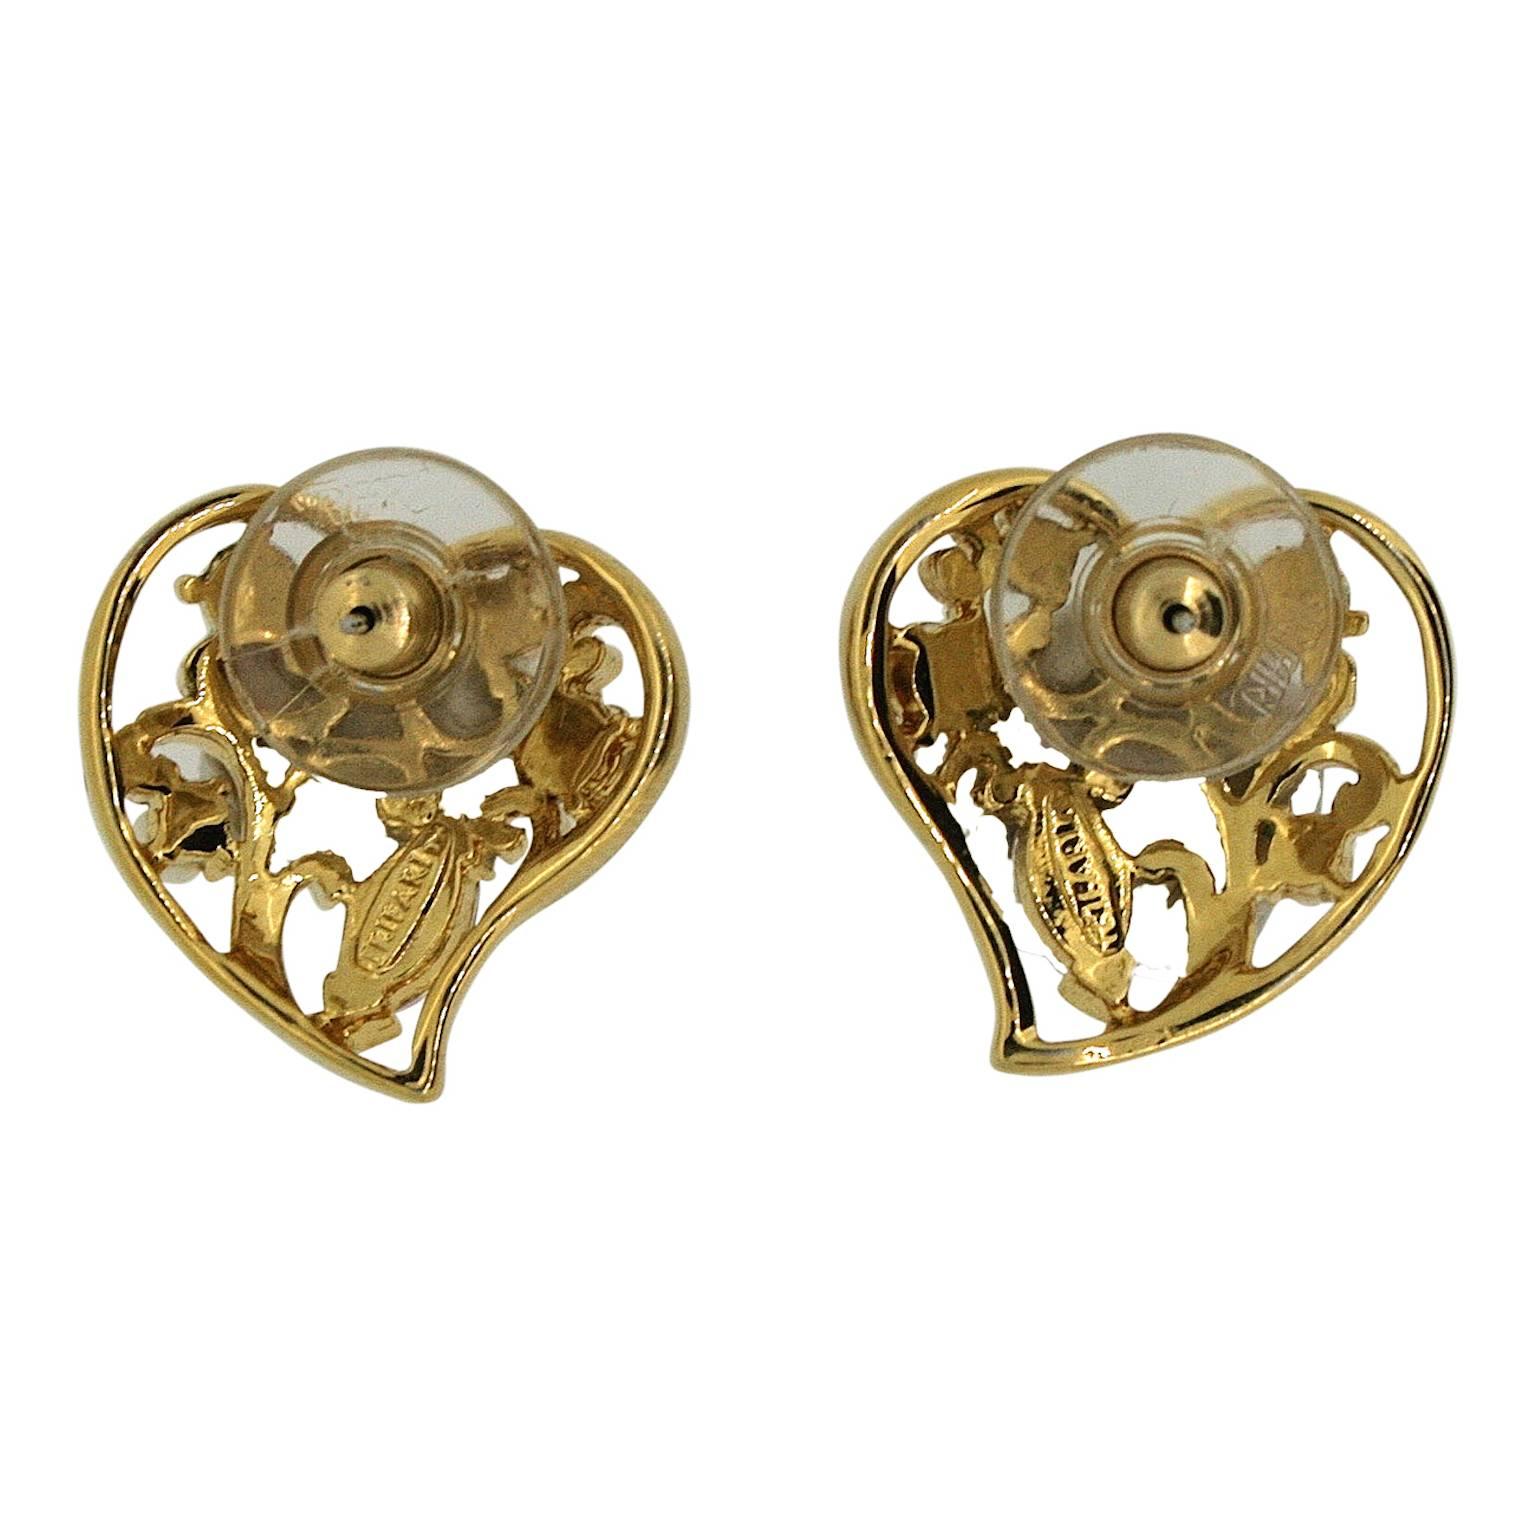 These pretty earrings are for pierced ears and were made in the 1970s by Trifari.

Condition Report:
Excellent

The Details...
These gold tone earrings feature an open-work 'heart' design. They are detailed with round and navette, lilac and pink